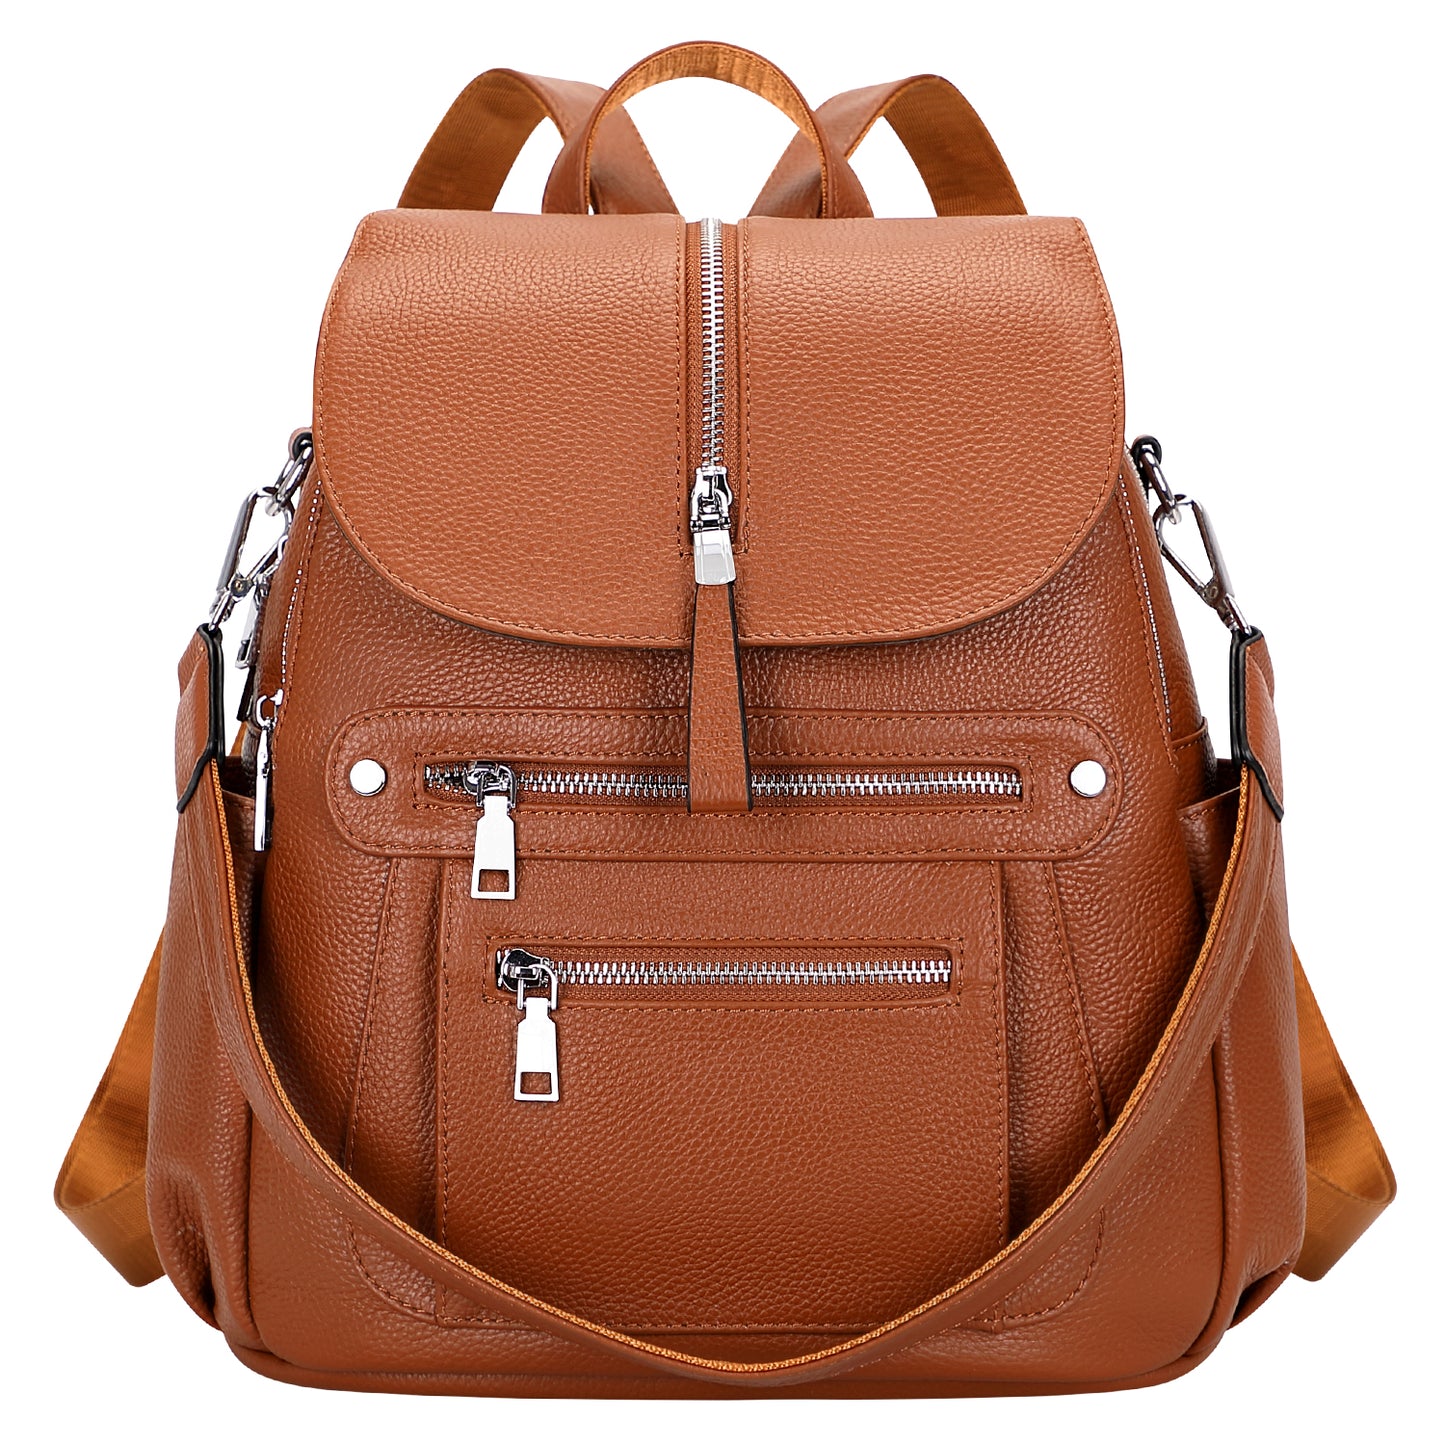 ALTOSY Women Leather Backpack with Flap